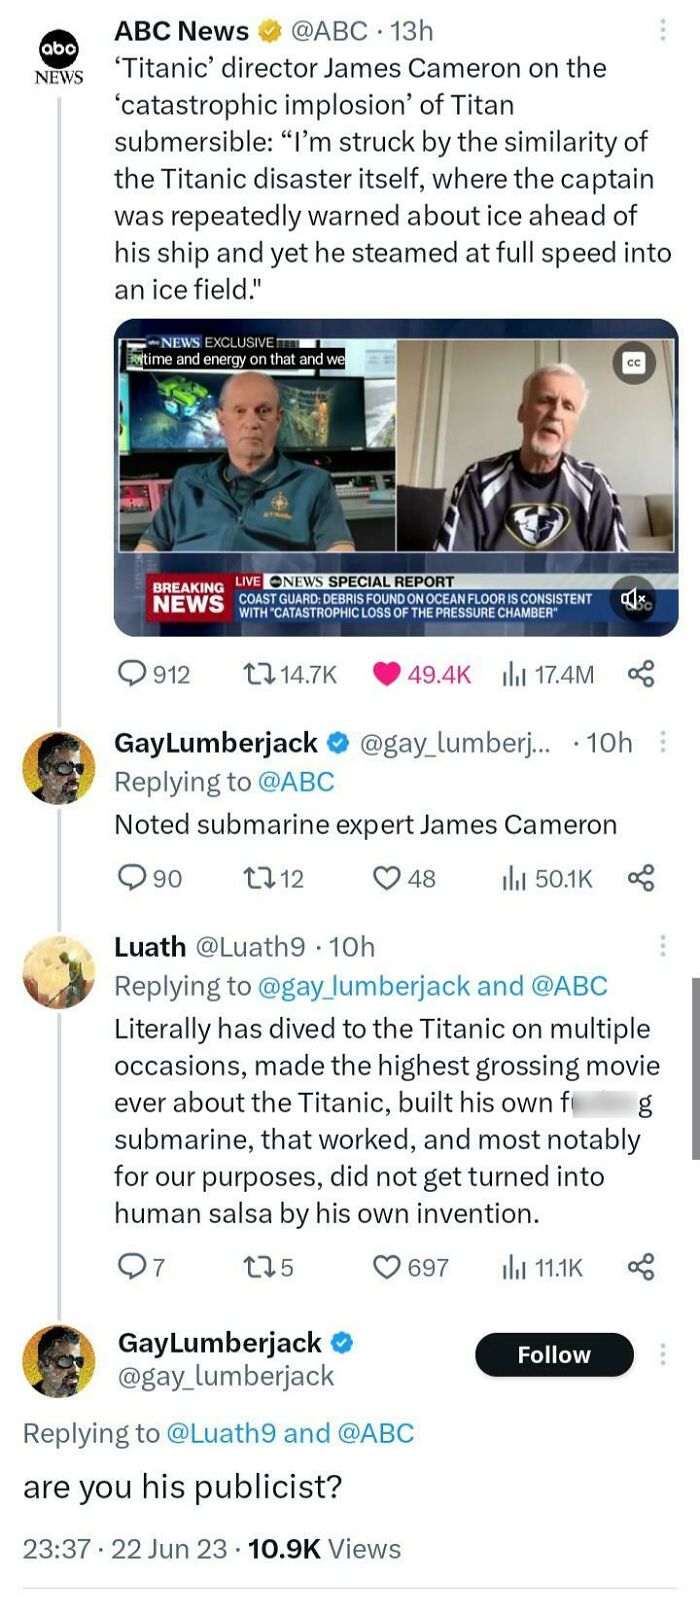 Twittee User Doesn't Seem Happy To Learn That James Cameron Is, As A Matter Of Fact, A Noted Submarine Expert